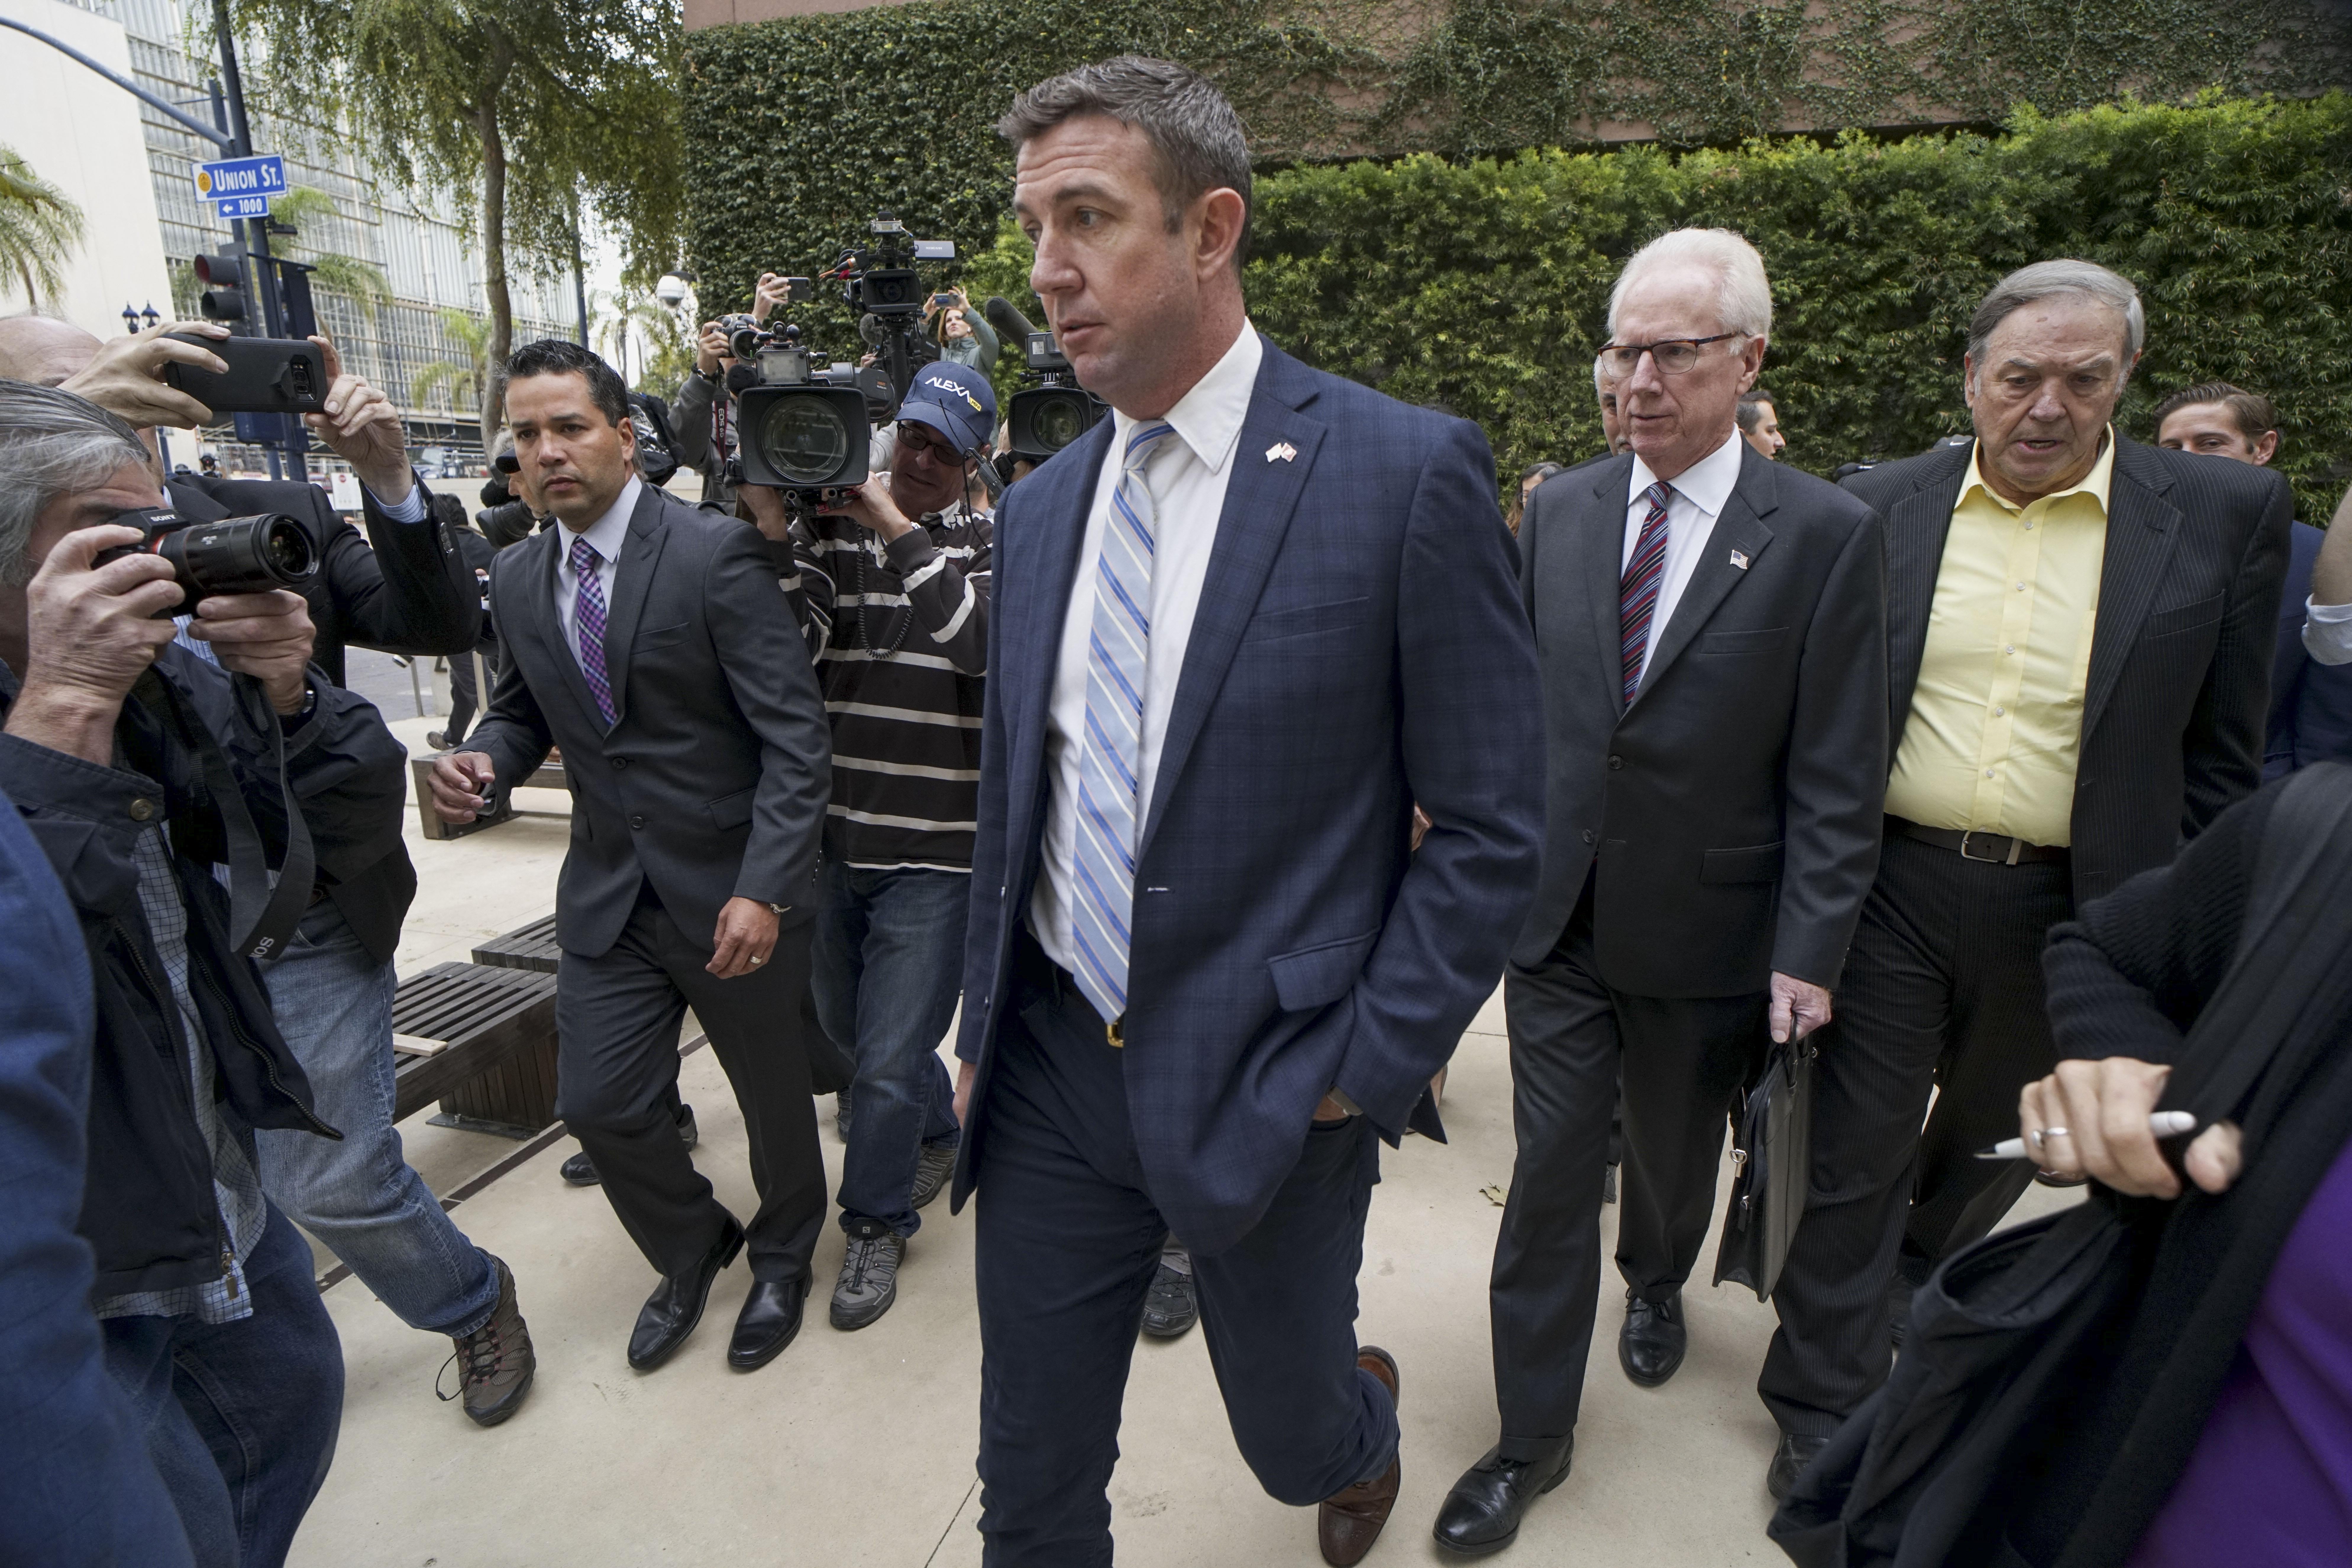 Duncan Hunter walking outside, surrounded by men in suits and photographers.